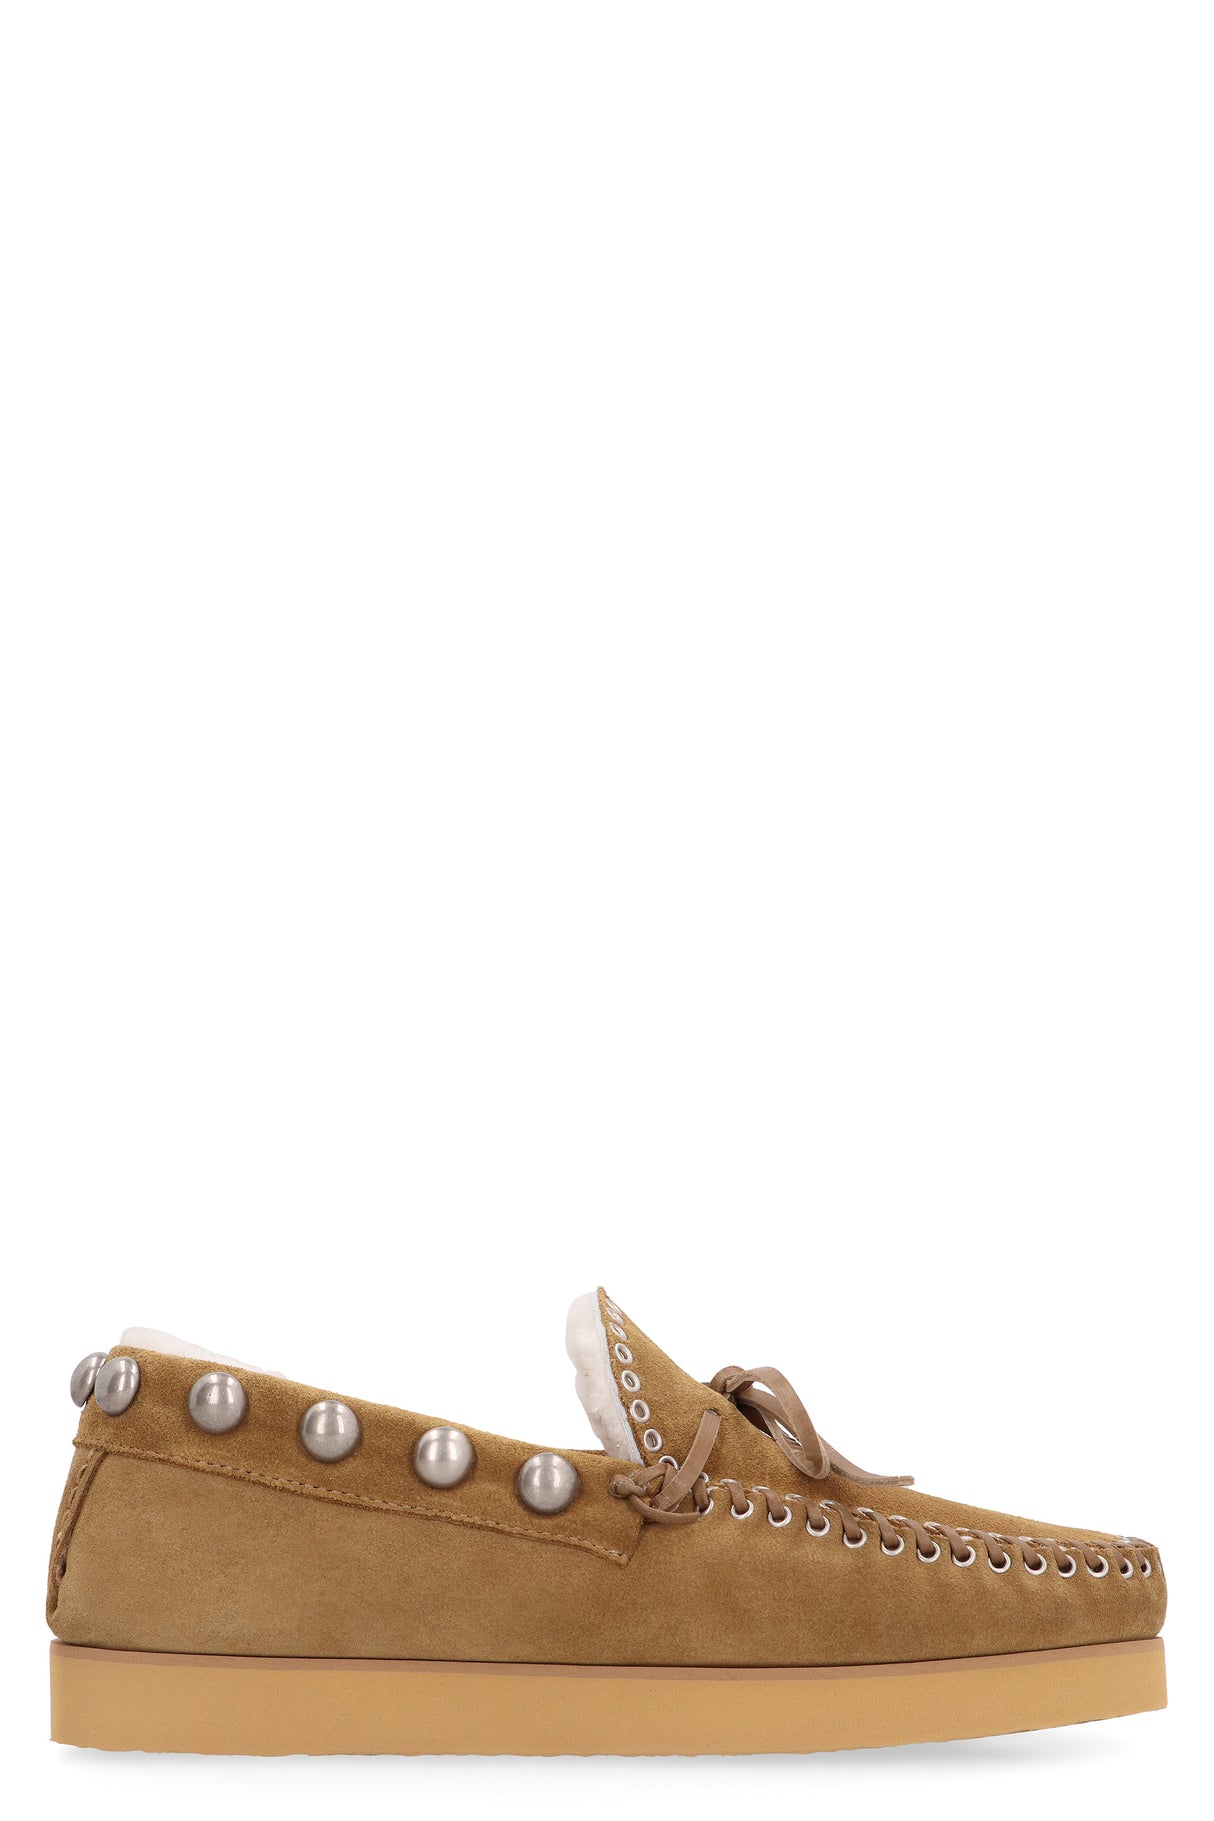 ISABEL MARANT Beige Suede Loafers with Shearling Lining, Silver Studs - FW23 Collection